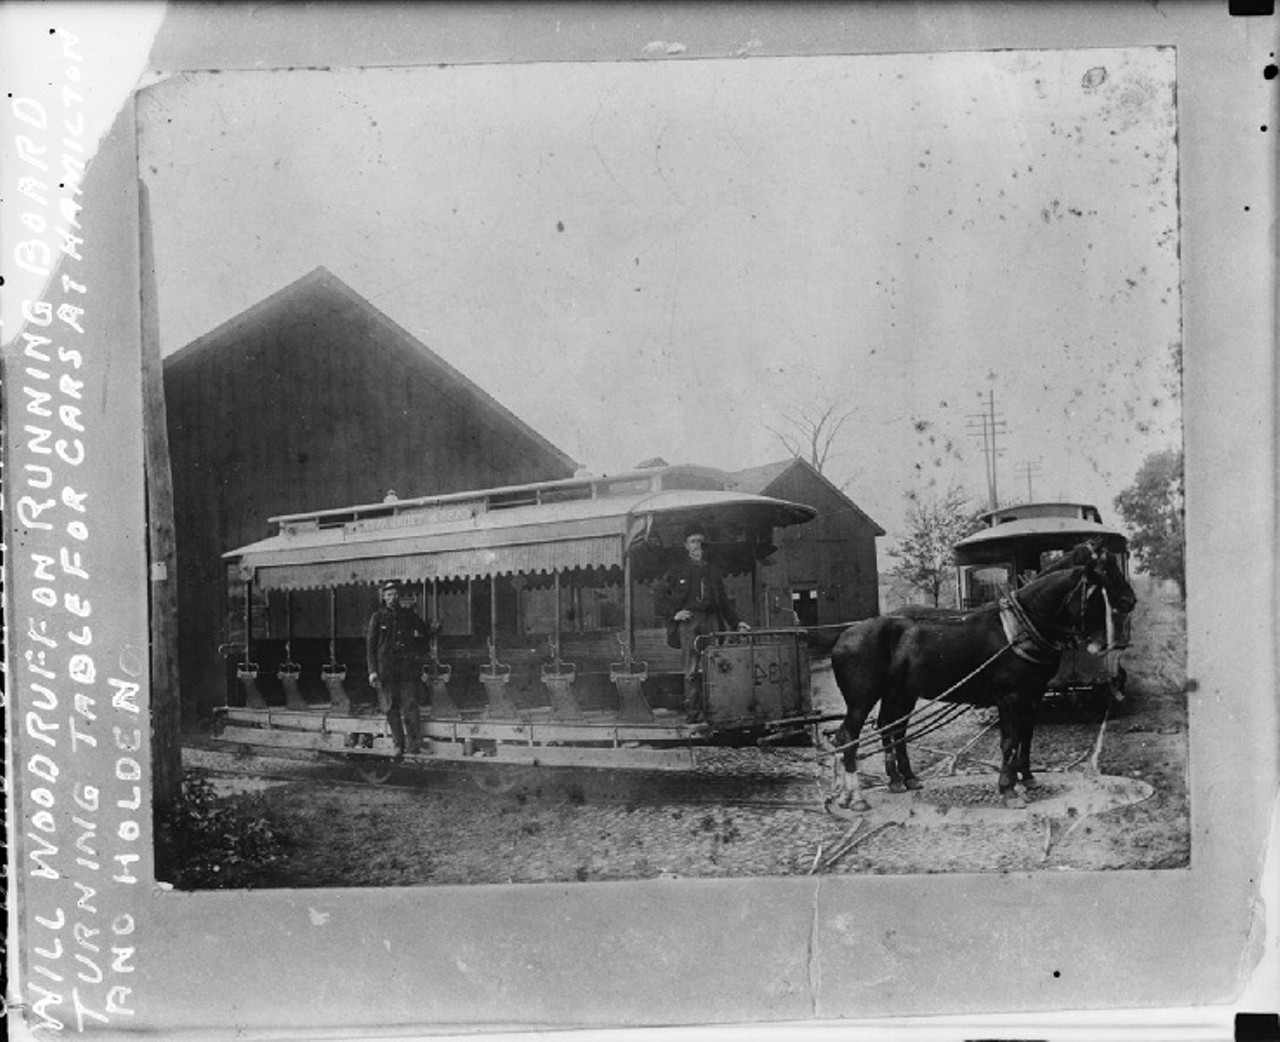 The conversion to machine power was equally fitful. Some streetcars ran on unshielded wires strung overhead, others on third rails embedded in slots in the street. A line on Cadillac even used steam power briefly. But by the end of 1895, the last company had completely electrified its operations. If the photographic records are correct, this image is of one of the last holdouts from the 1890s, on a turntable for cars at Hamilton and Holden.